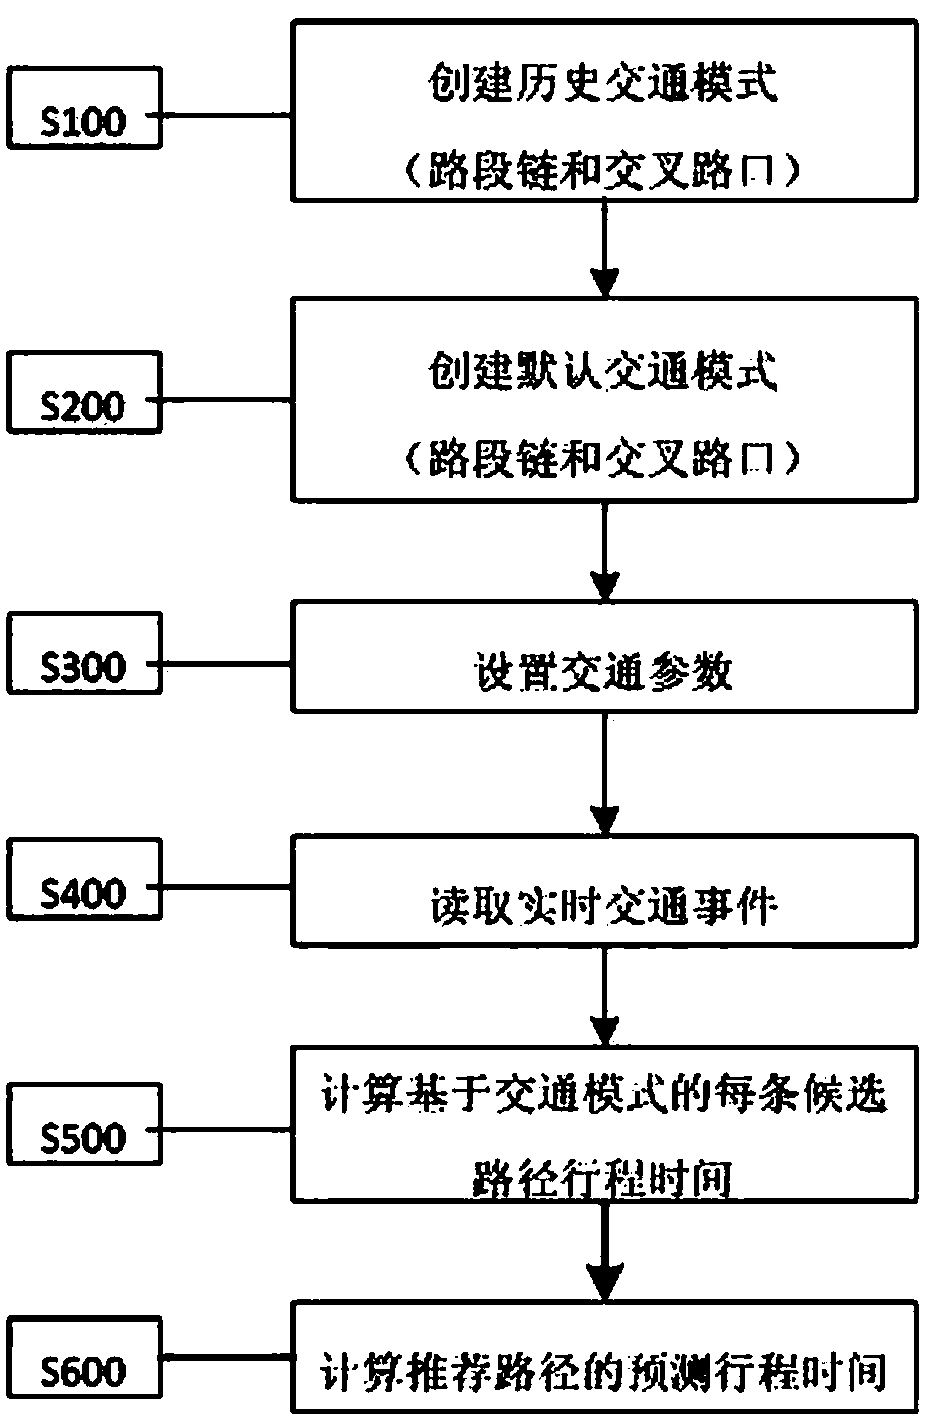 Urban route travel time forecasting method based on pattern matching